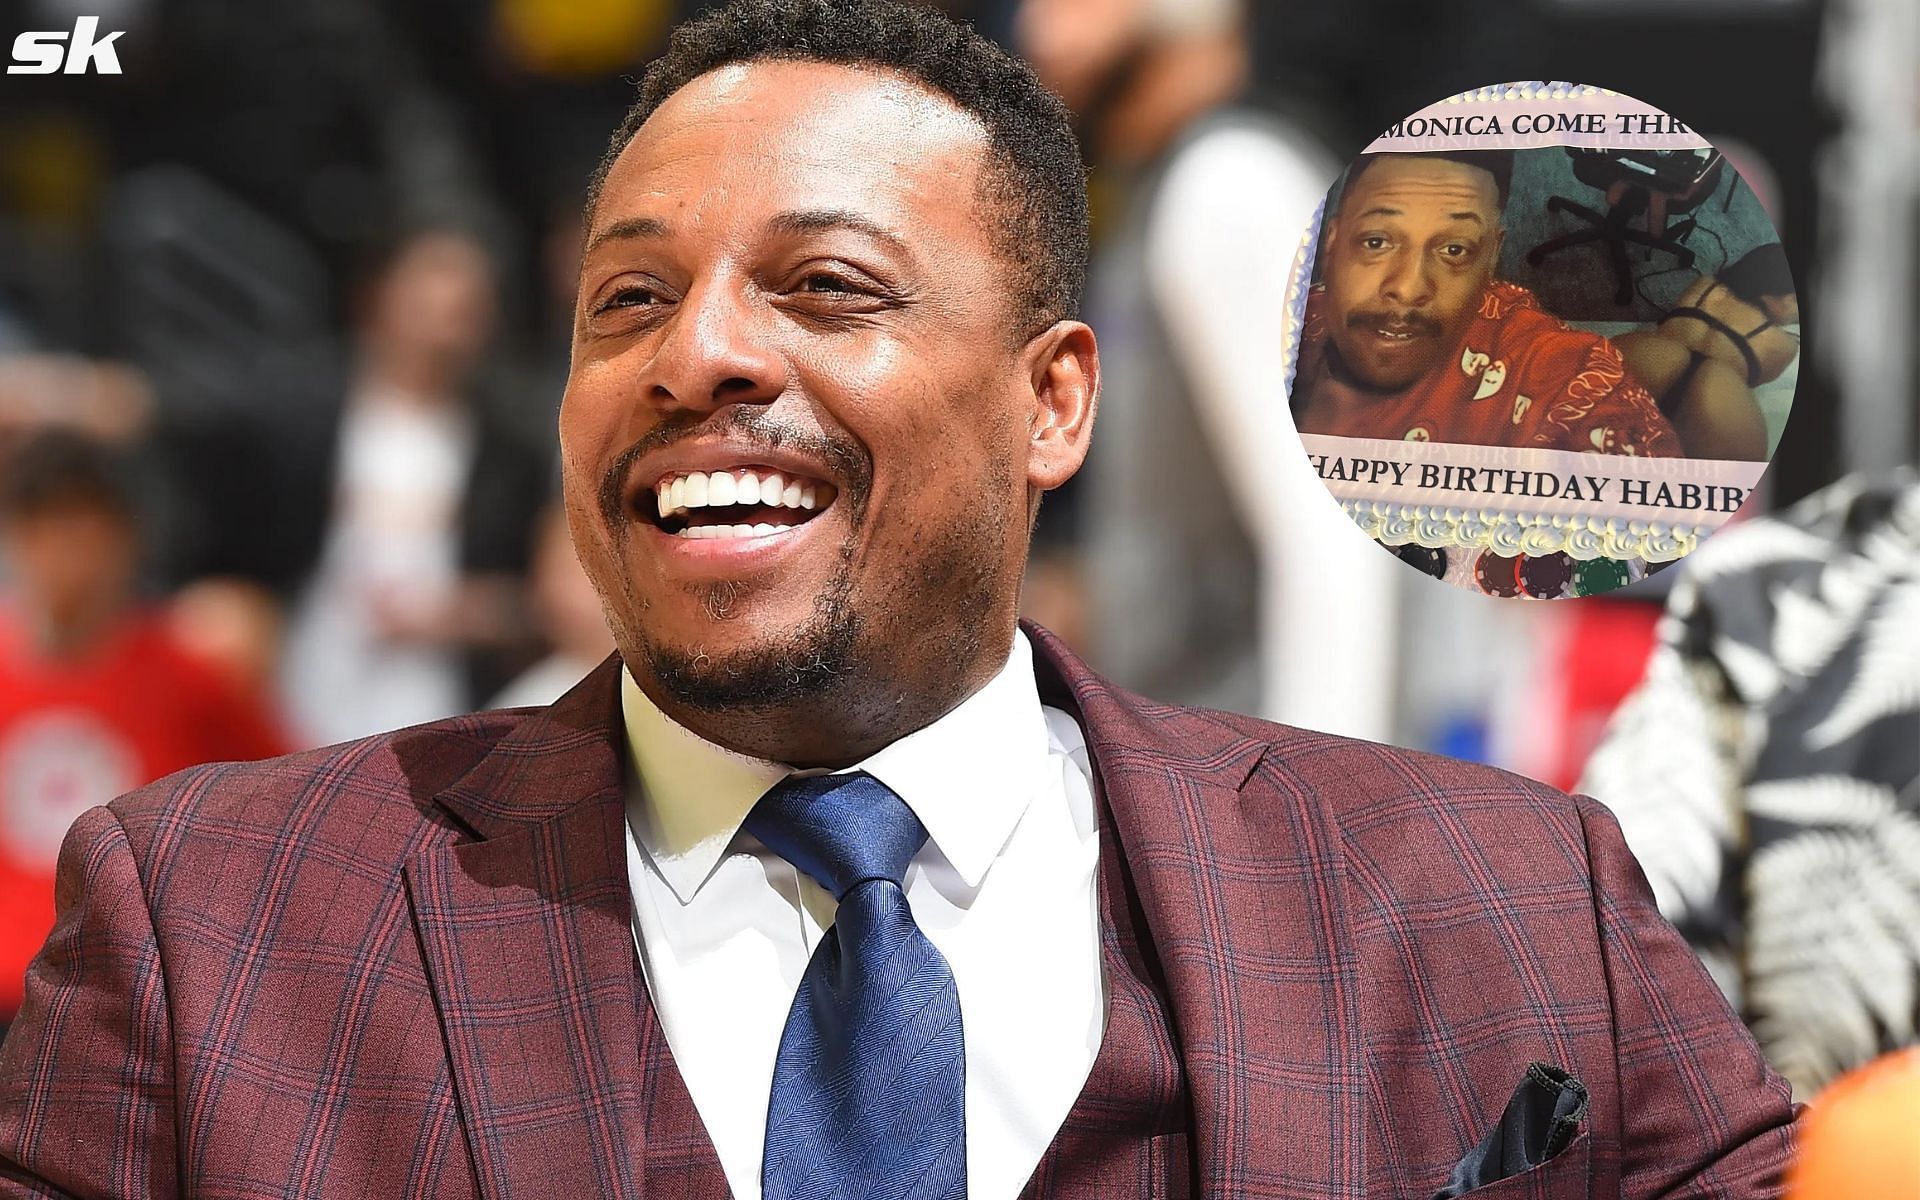 Paul Pierce recieved an NSFW birthday cake from his friends 